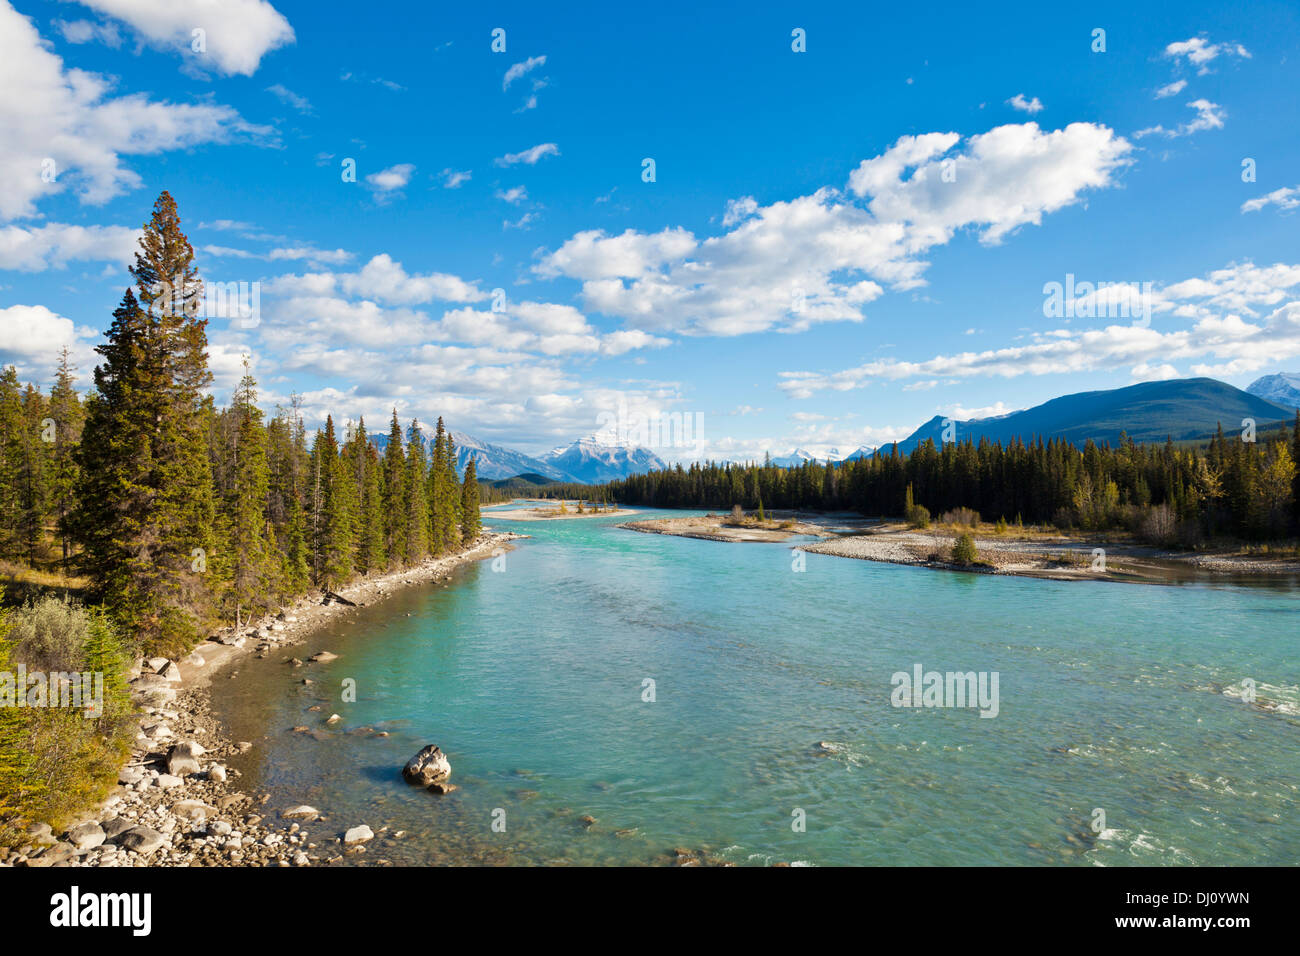 The Athabasca River flowing through Jasper National Park just outside the town of Jasper Canadian Rockies Alberta Canada Stock Photo